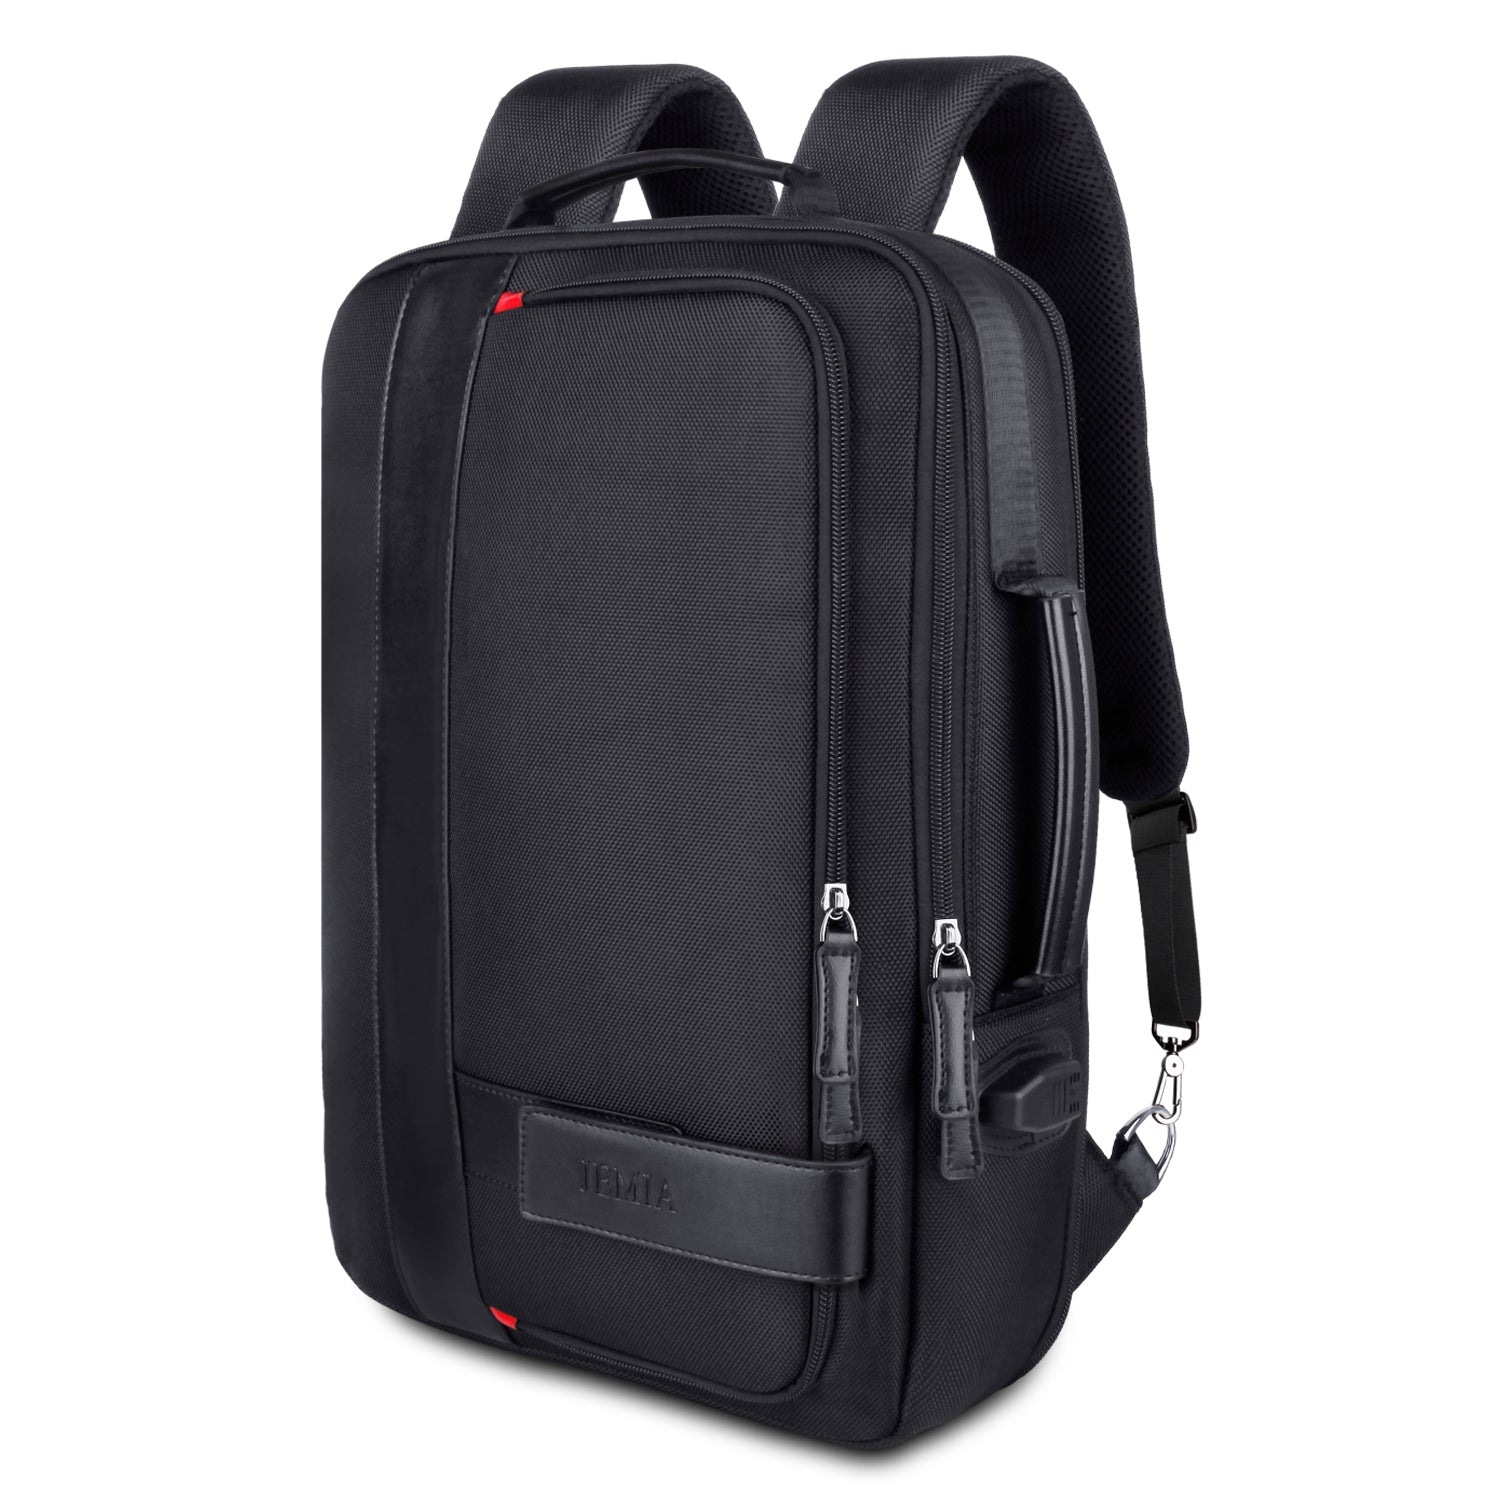 New Backpack with Expandable Function and USB Port